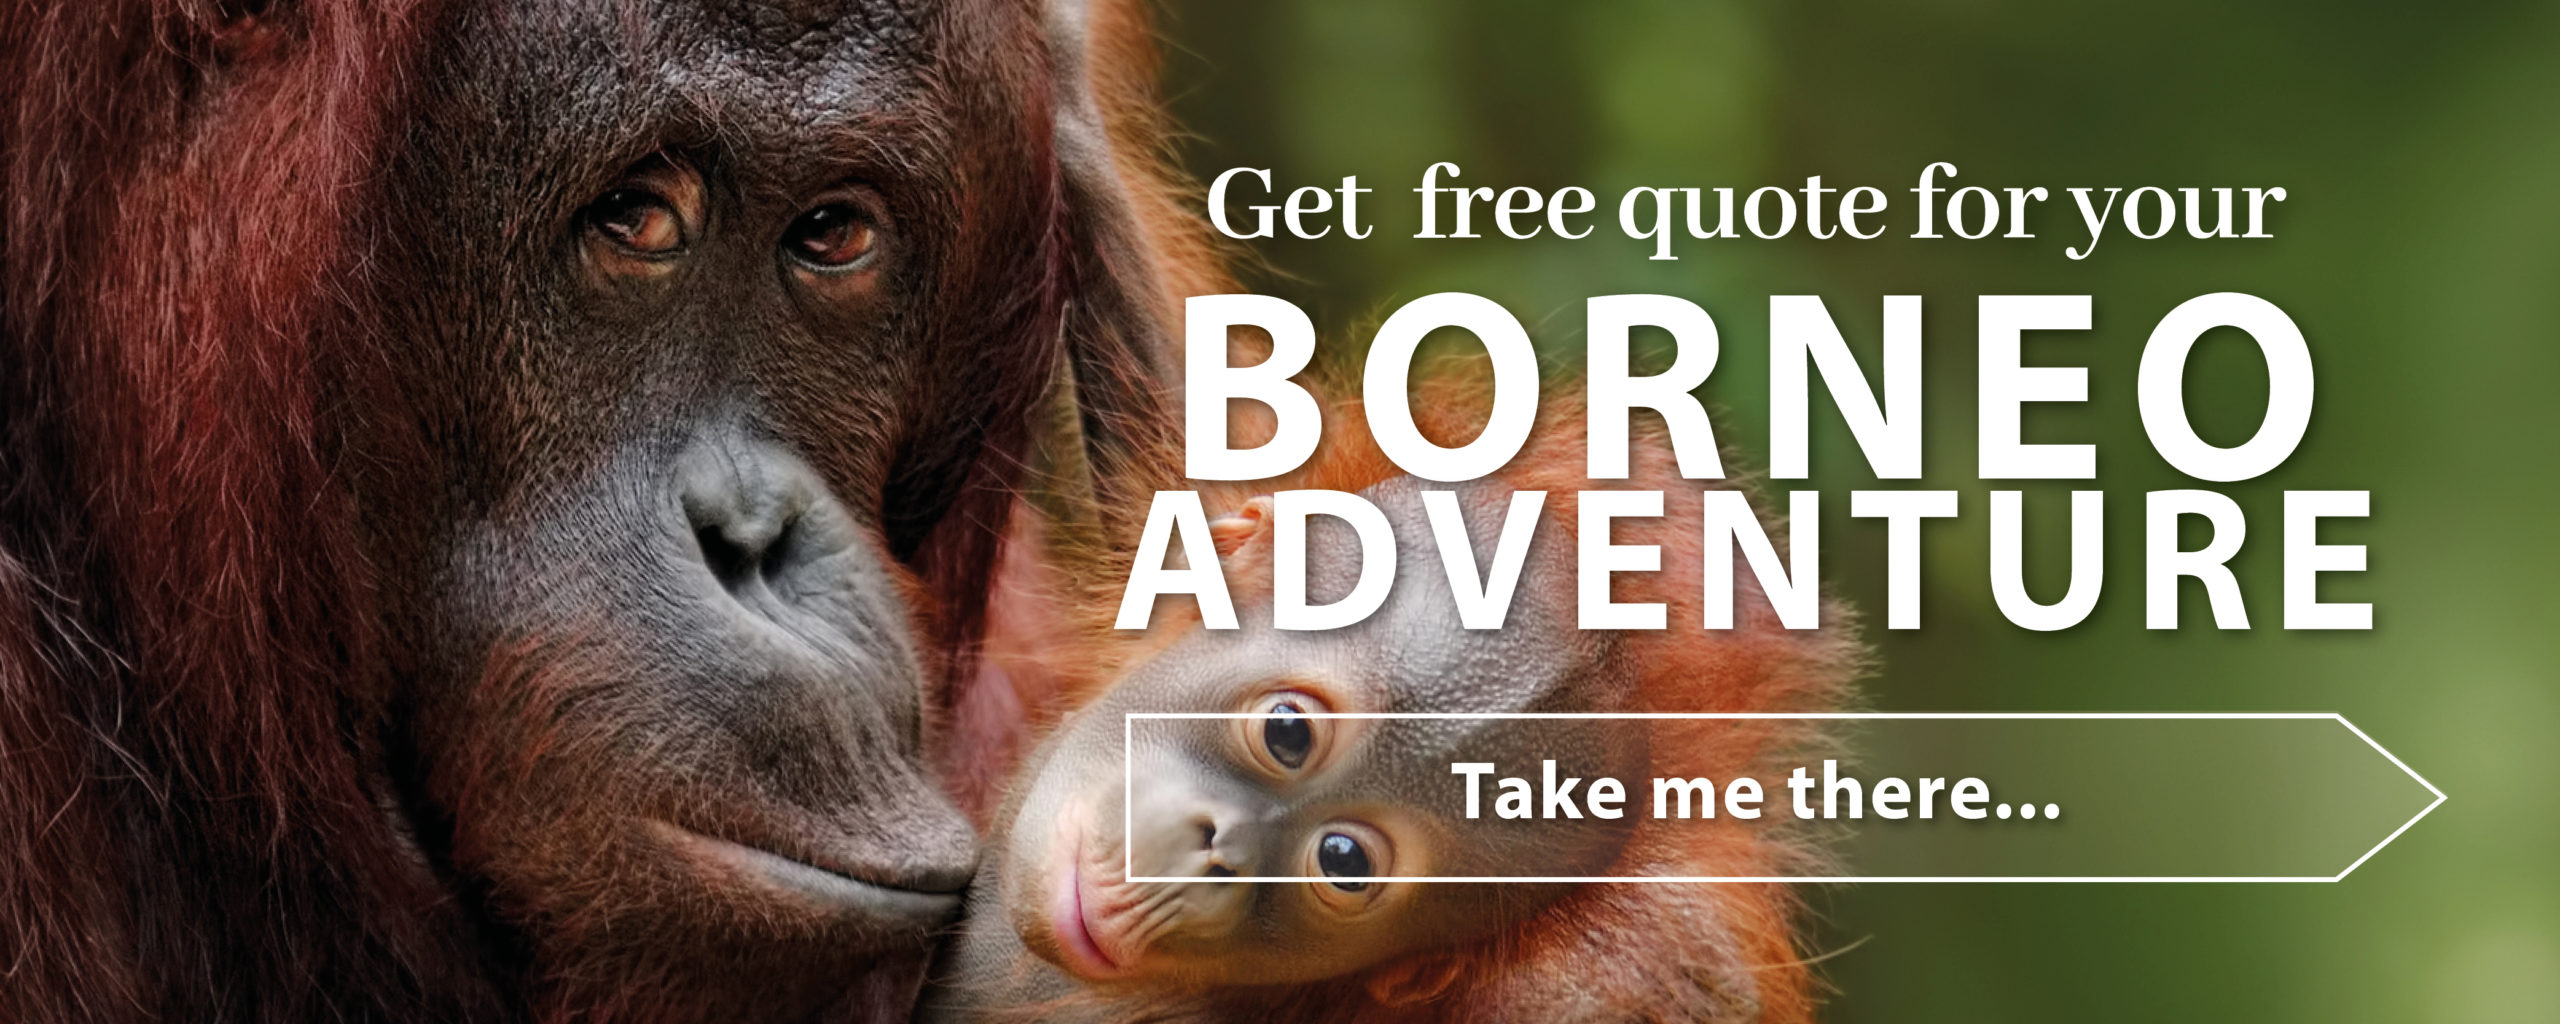 Get a quote for your Borneo Holiday